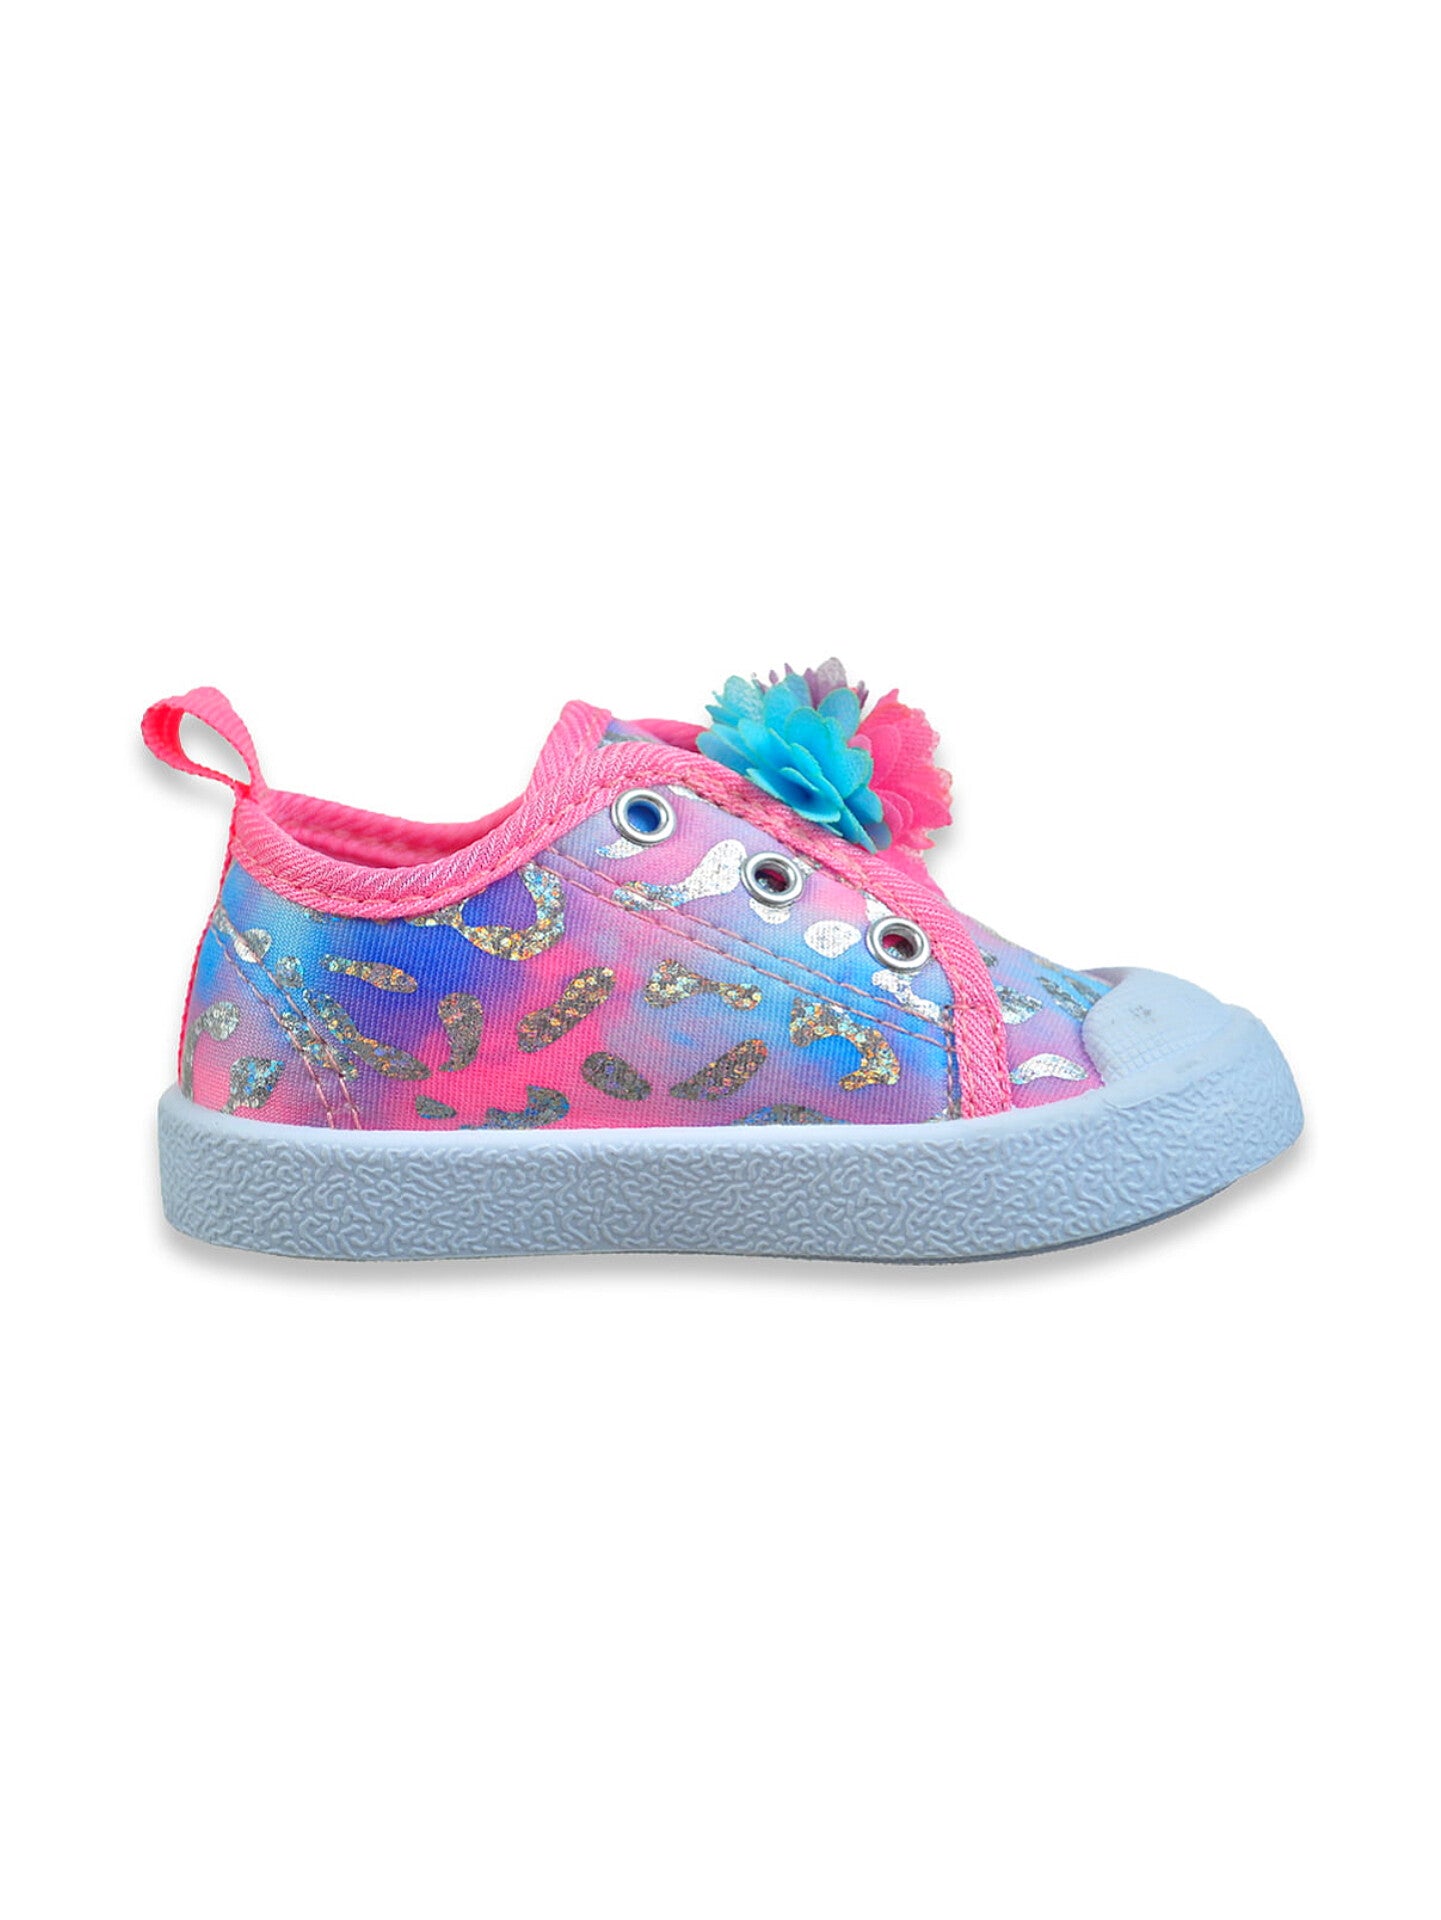 Laura Ashley Baby Girls' Allover Pink Print Sneakers - Diaper Yard Gh